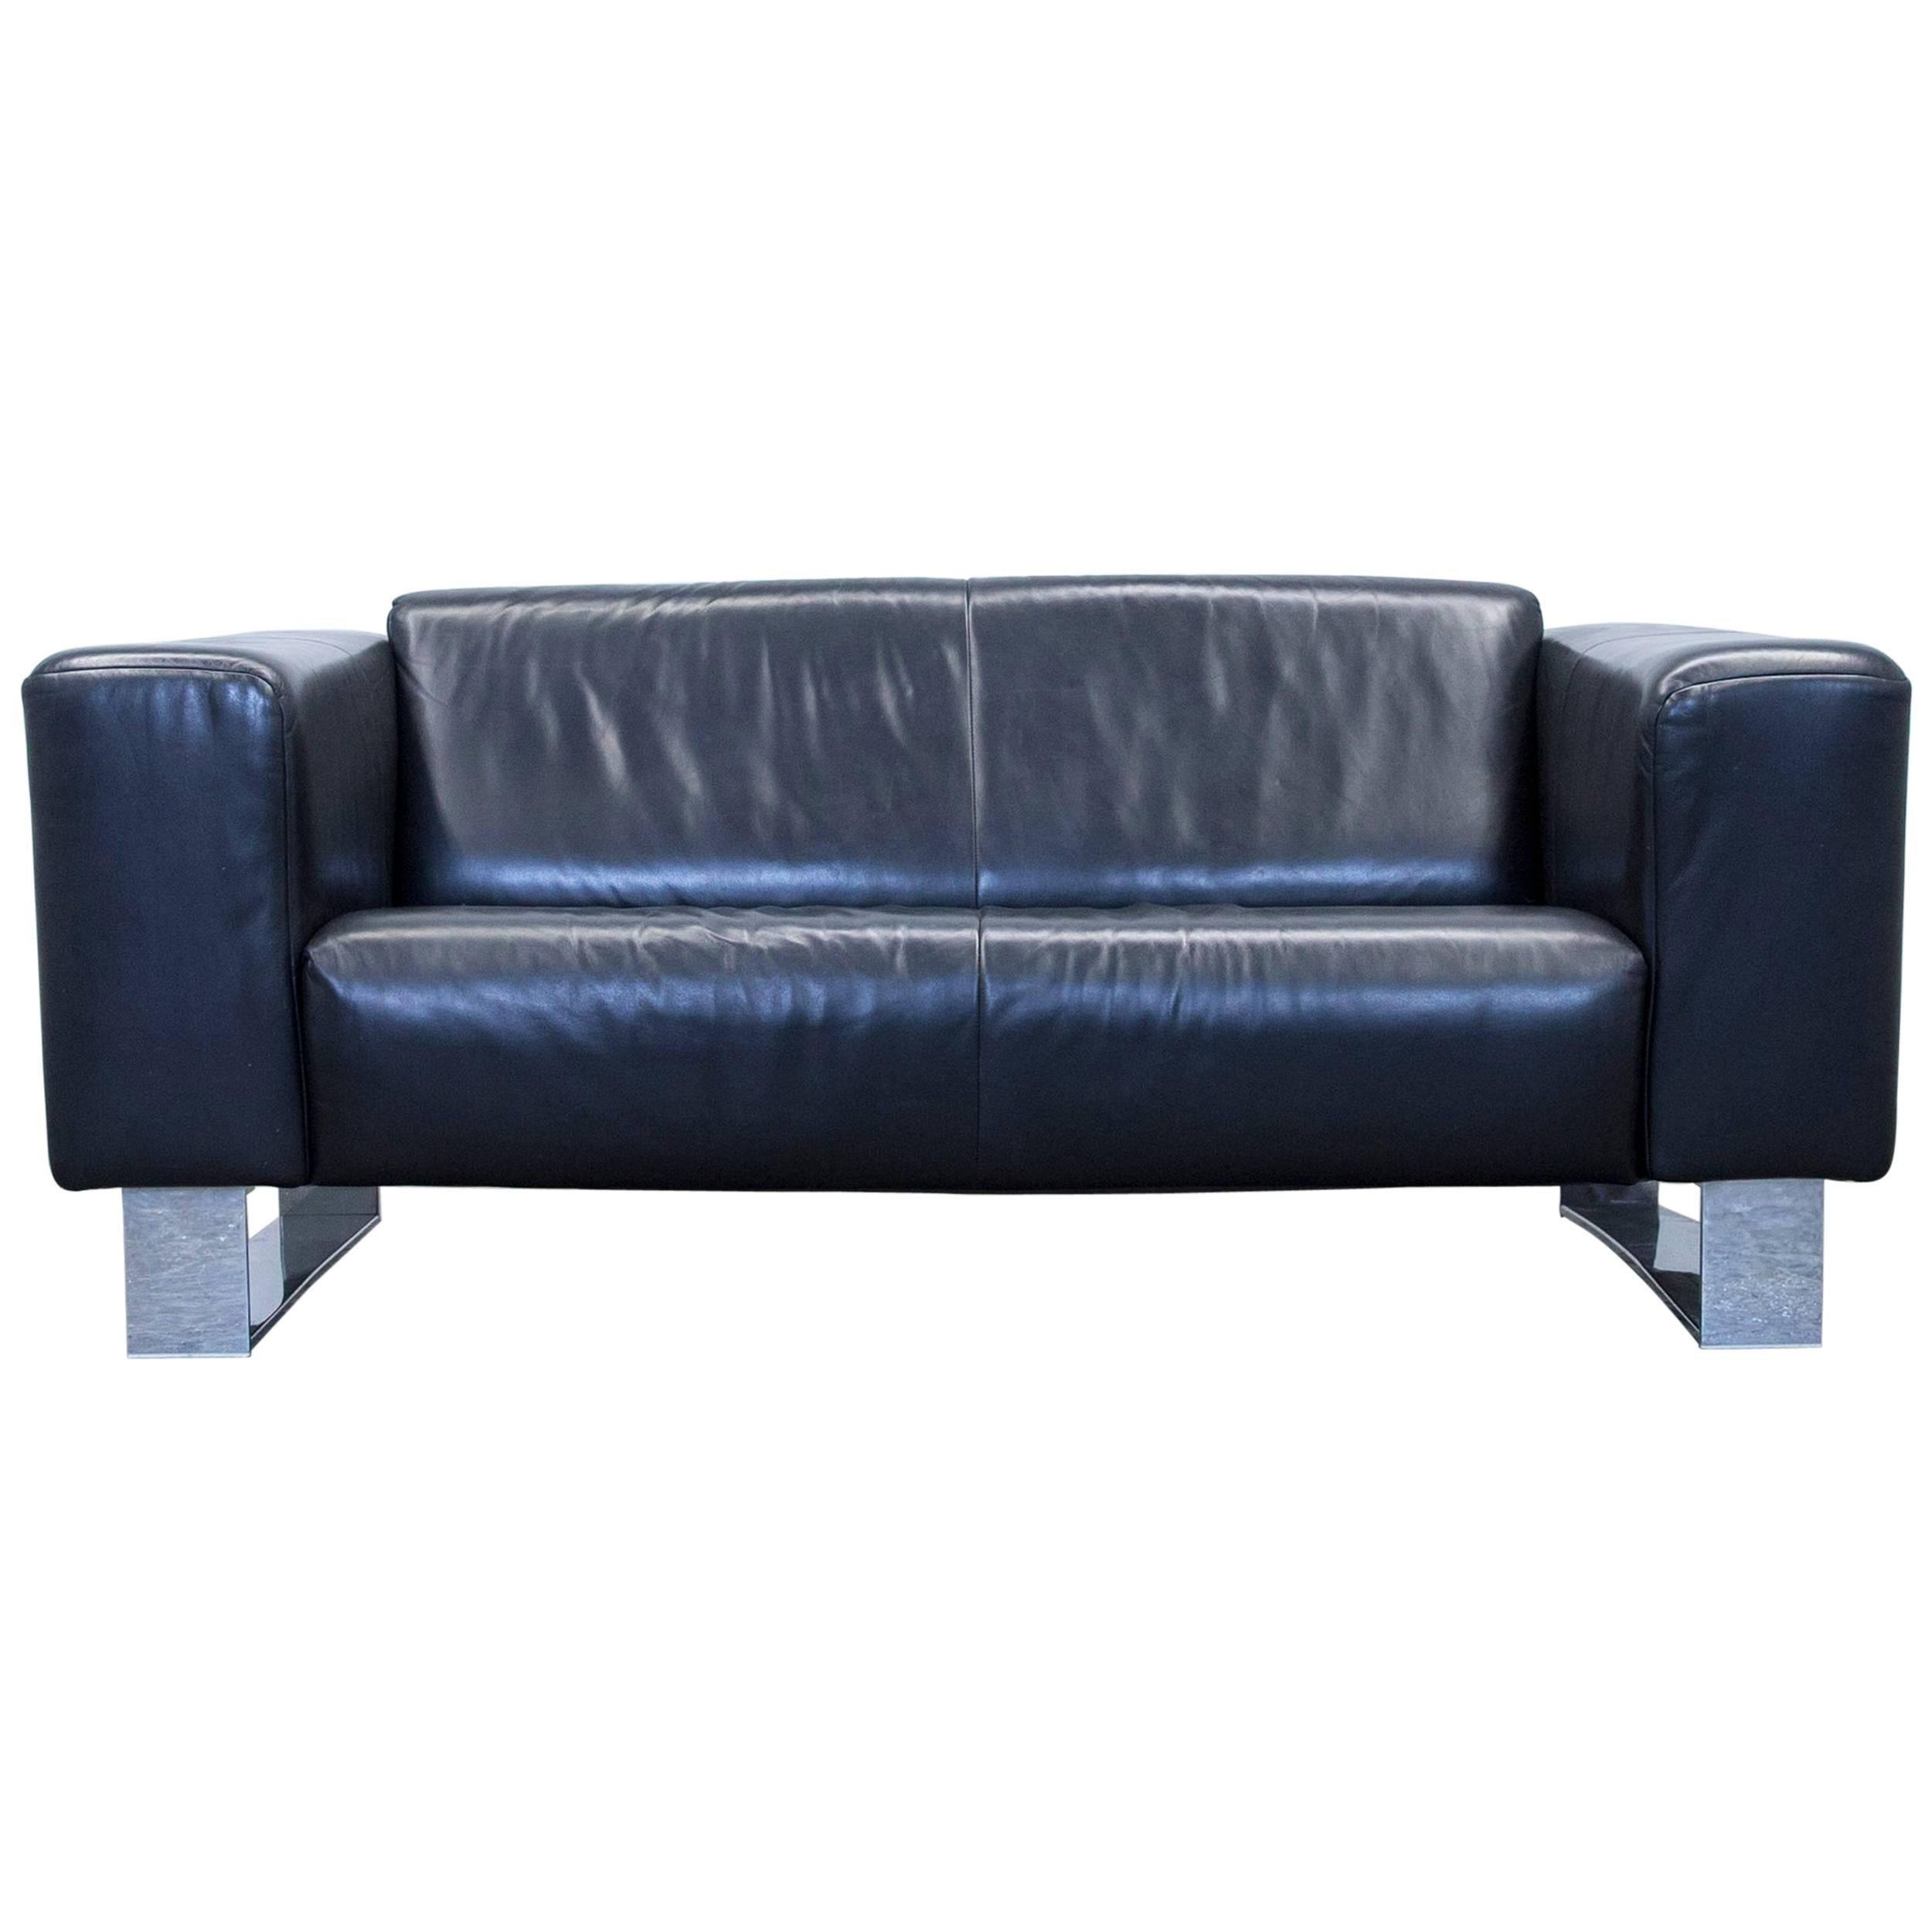 Rolf Benz Bmp Designer Sofa Leather Black Two-Seat Couch Modern